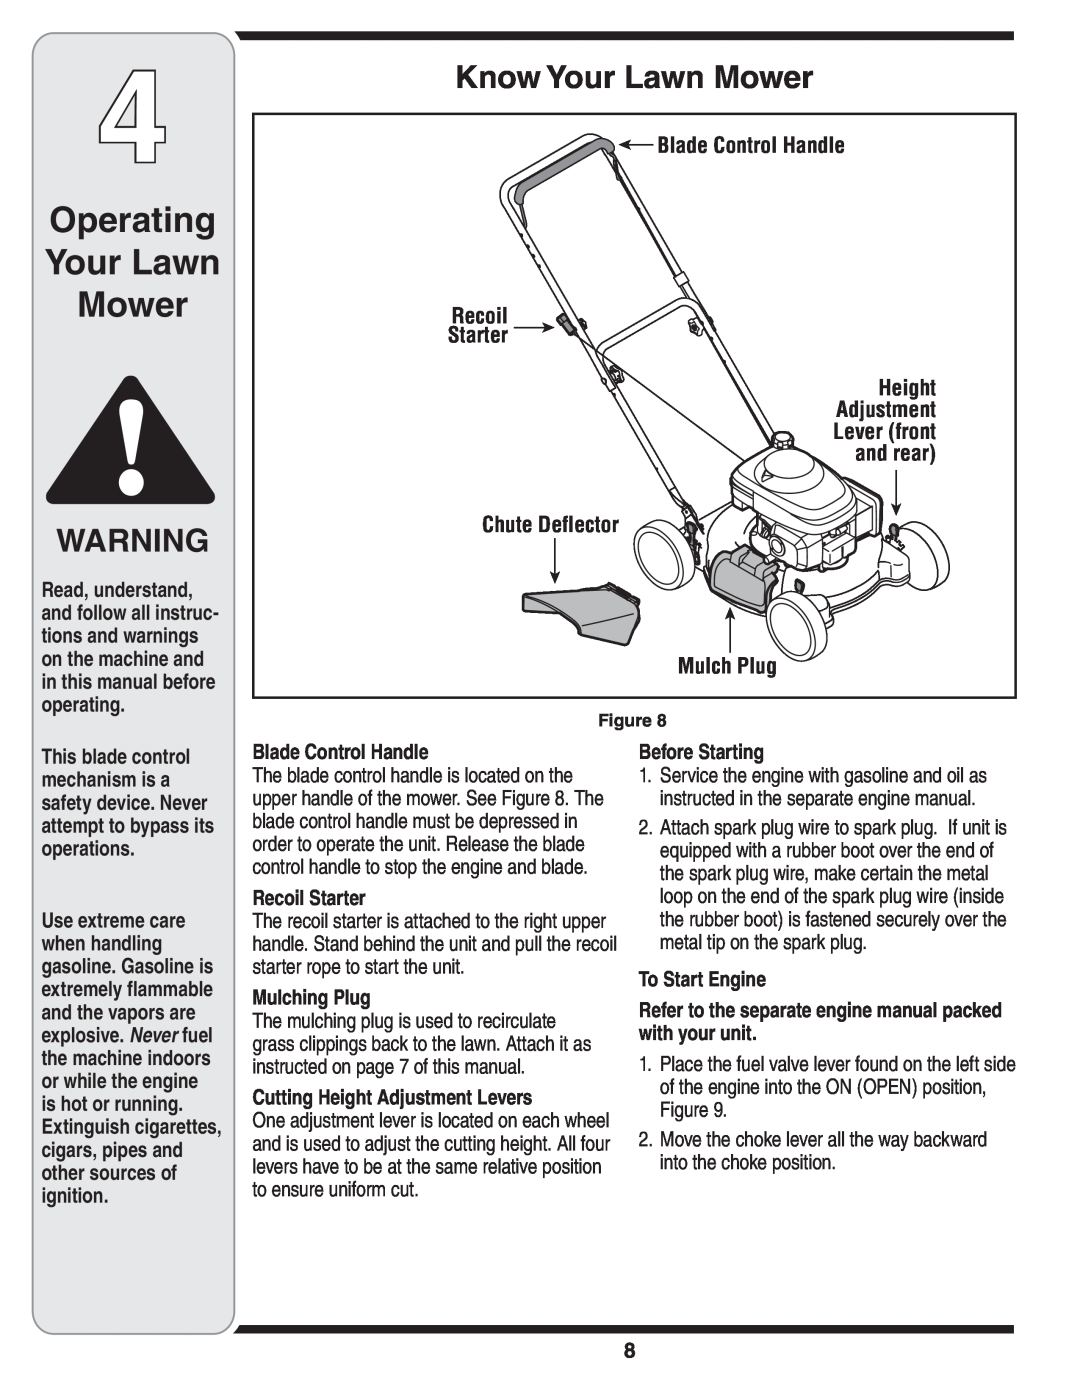 Troy-Bilt Series 100 warranty Operating Your Lawn Mower, Know Your Lawn Mower 